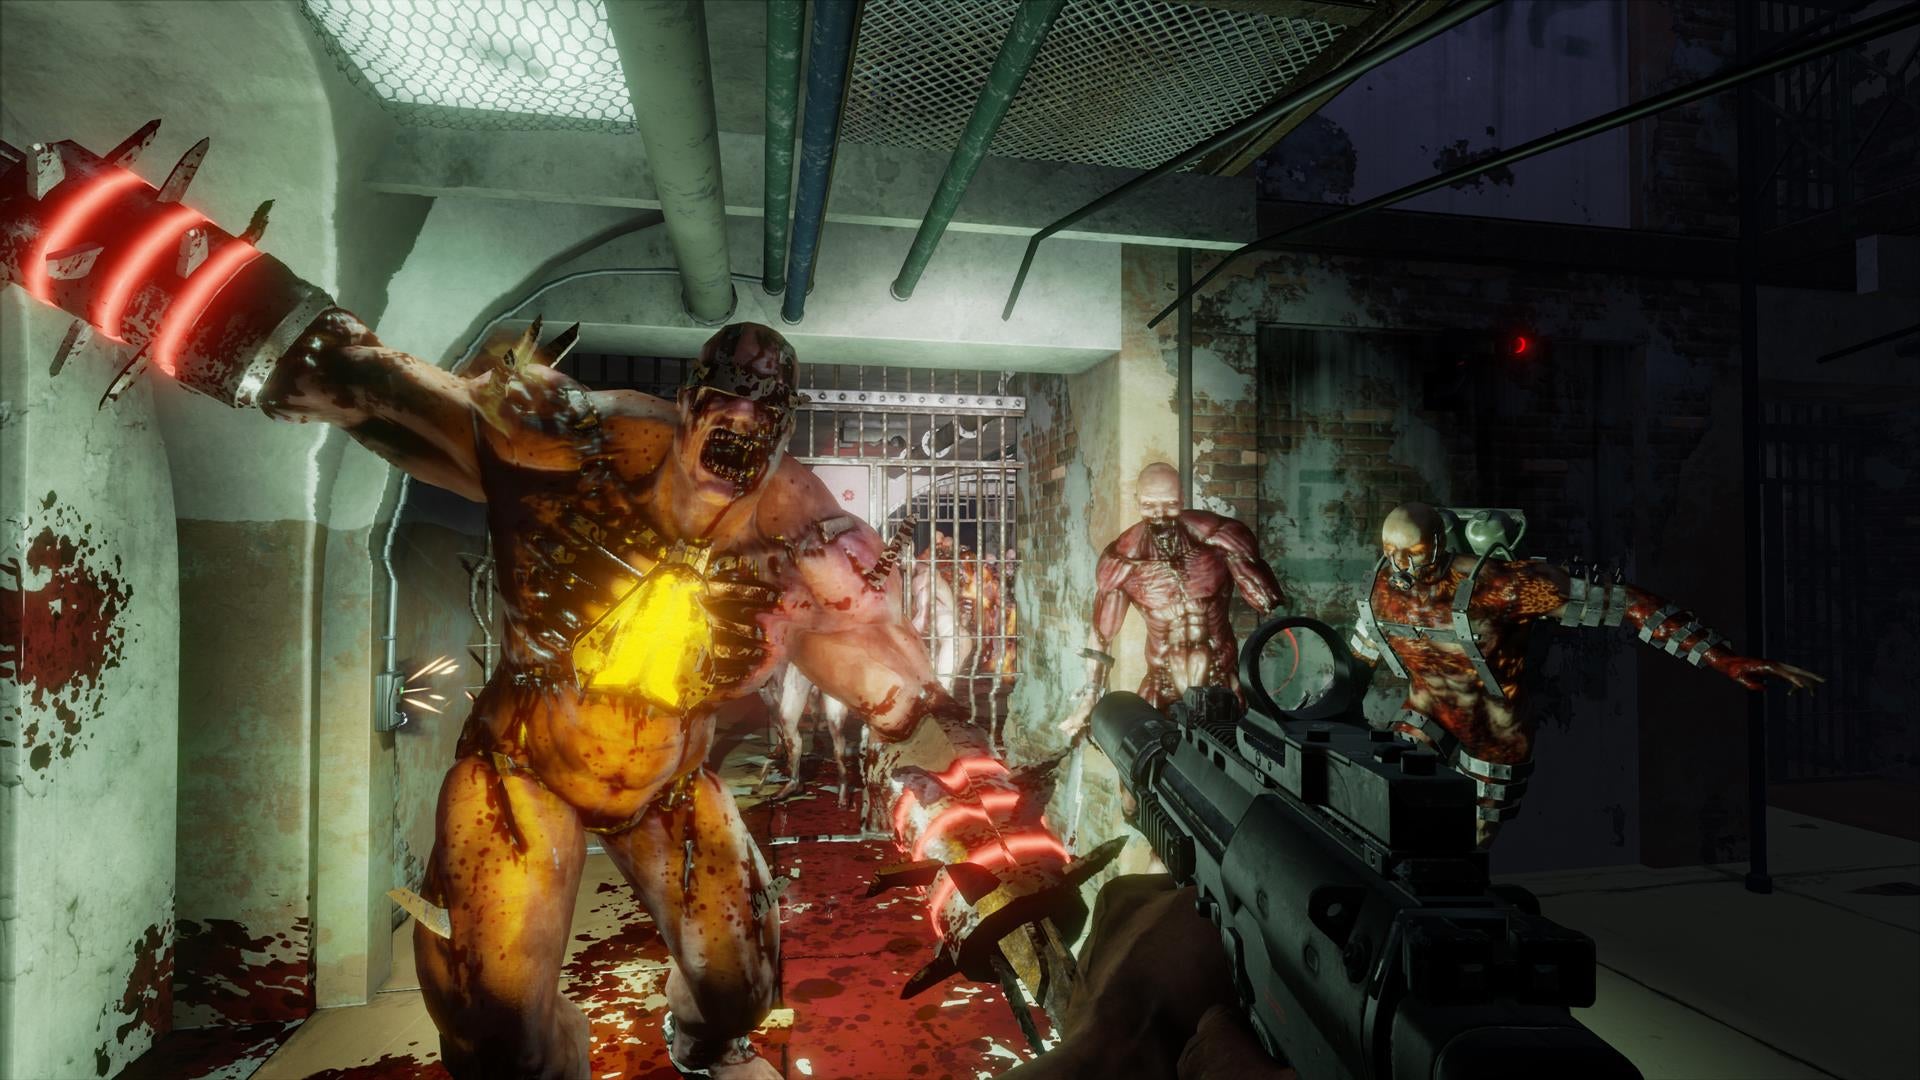 Image for Killing Floor 2 now available for PC, PS4 and PS4 Pro, here's the launch trailer